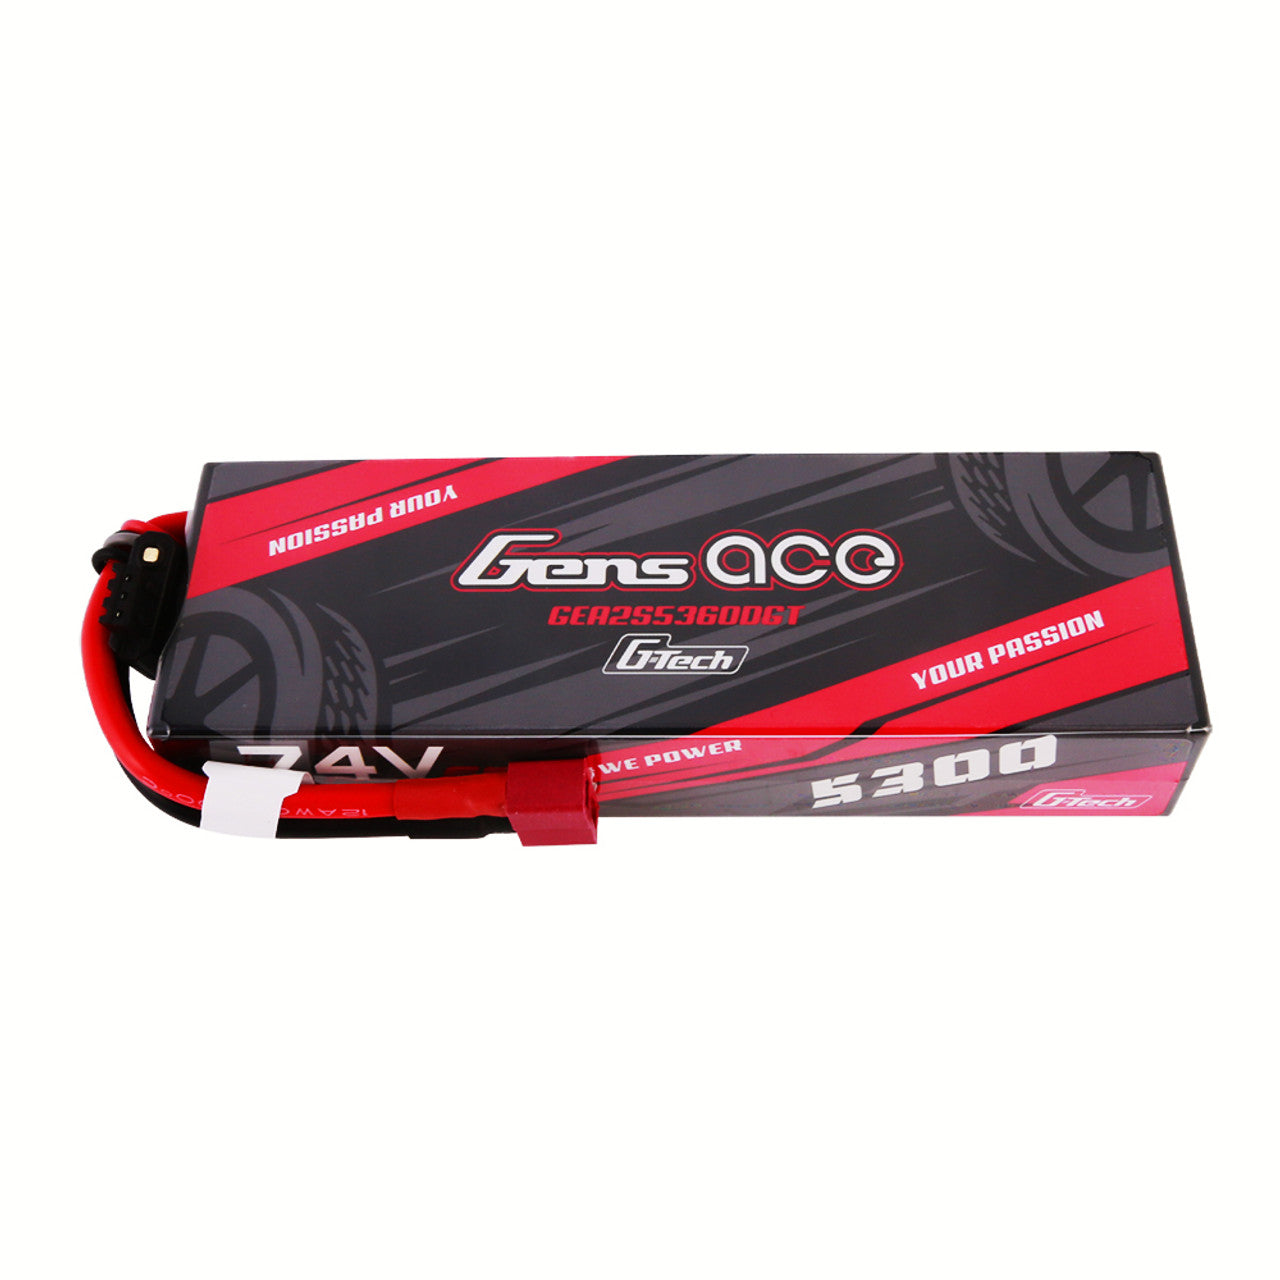 GEA2S5360DGT Gens Ace G-Tech 5300mAh 7.4V 60C 2S1P HardCase Lipo Battery Pack 21# With Deans Plug